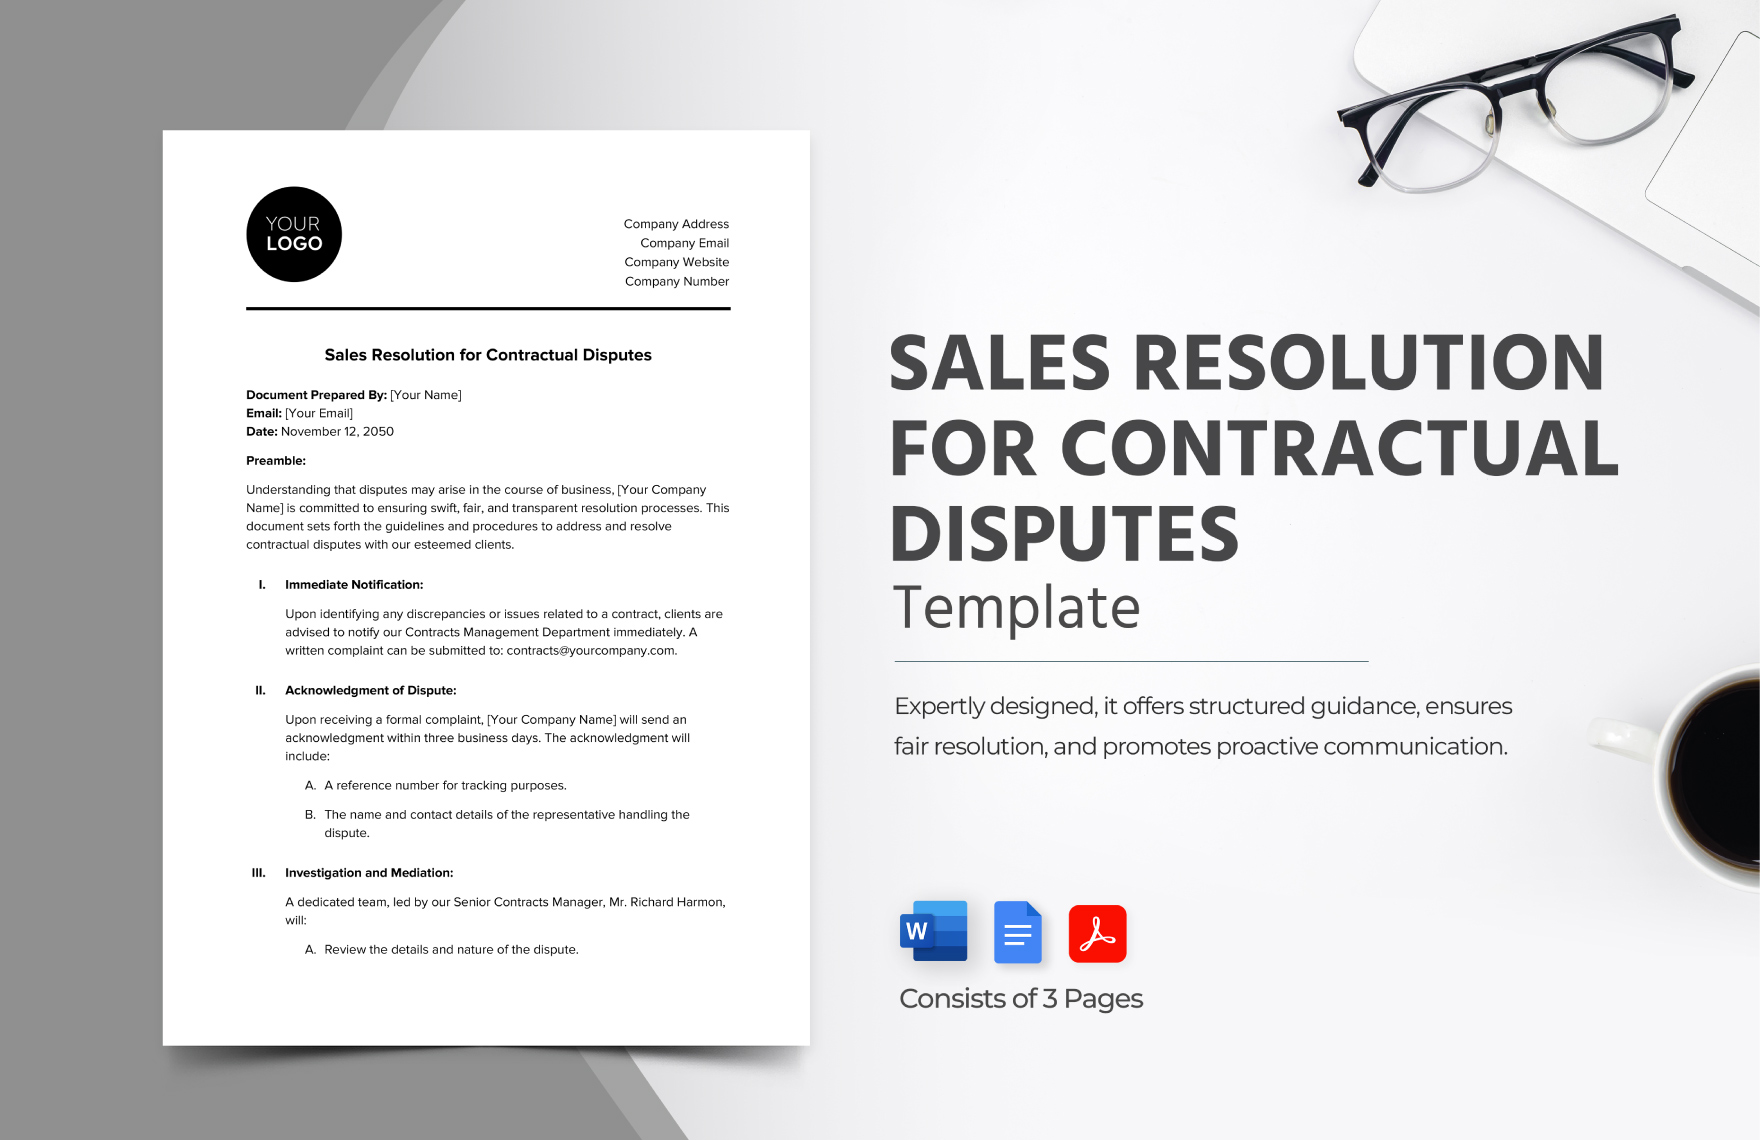 Sales Resolution for Contractual Disputes Template